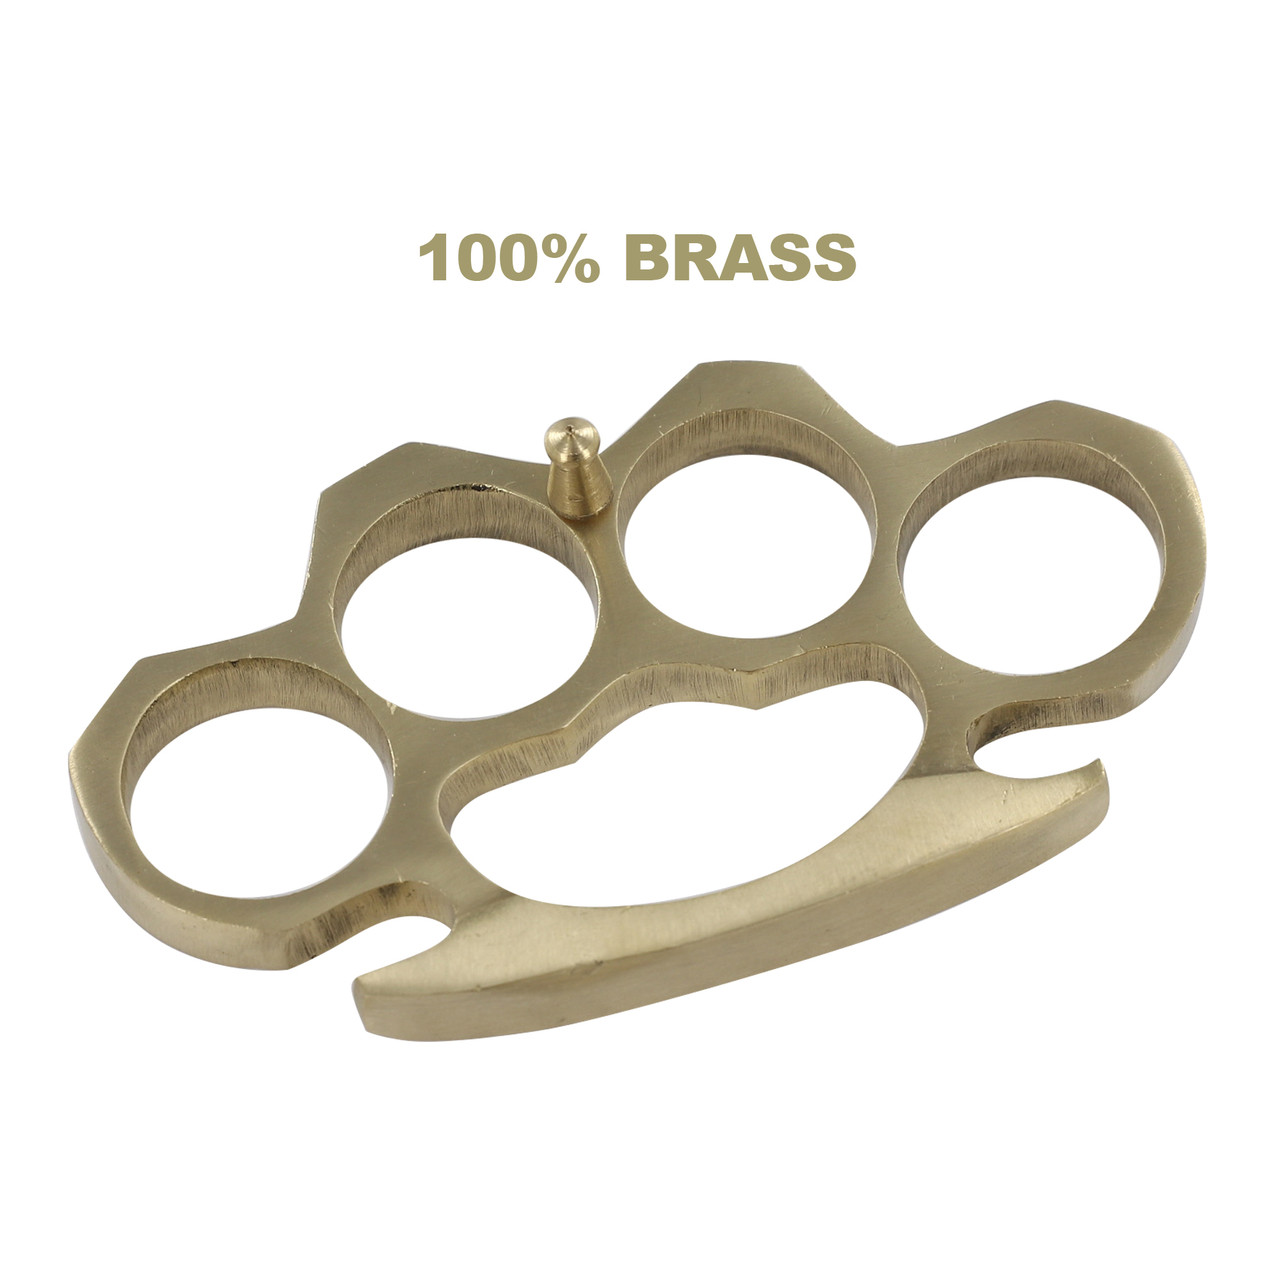 Fisticuffs 100% Solid Brass Classic Knuckle Duster Novelty Paper